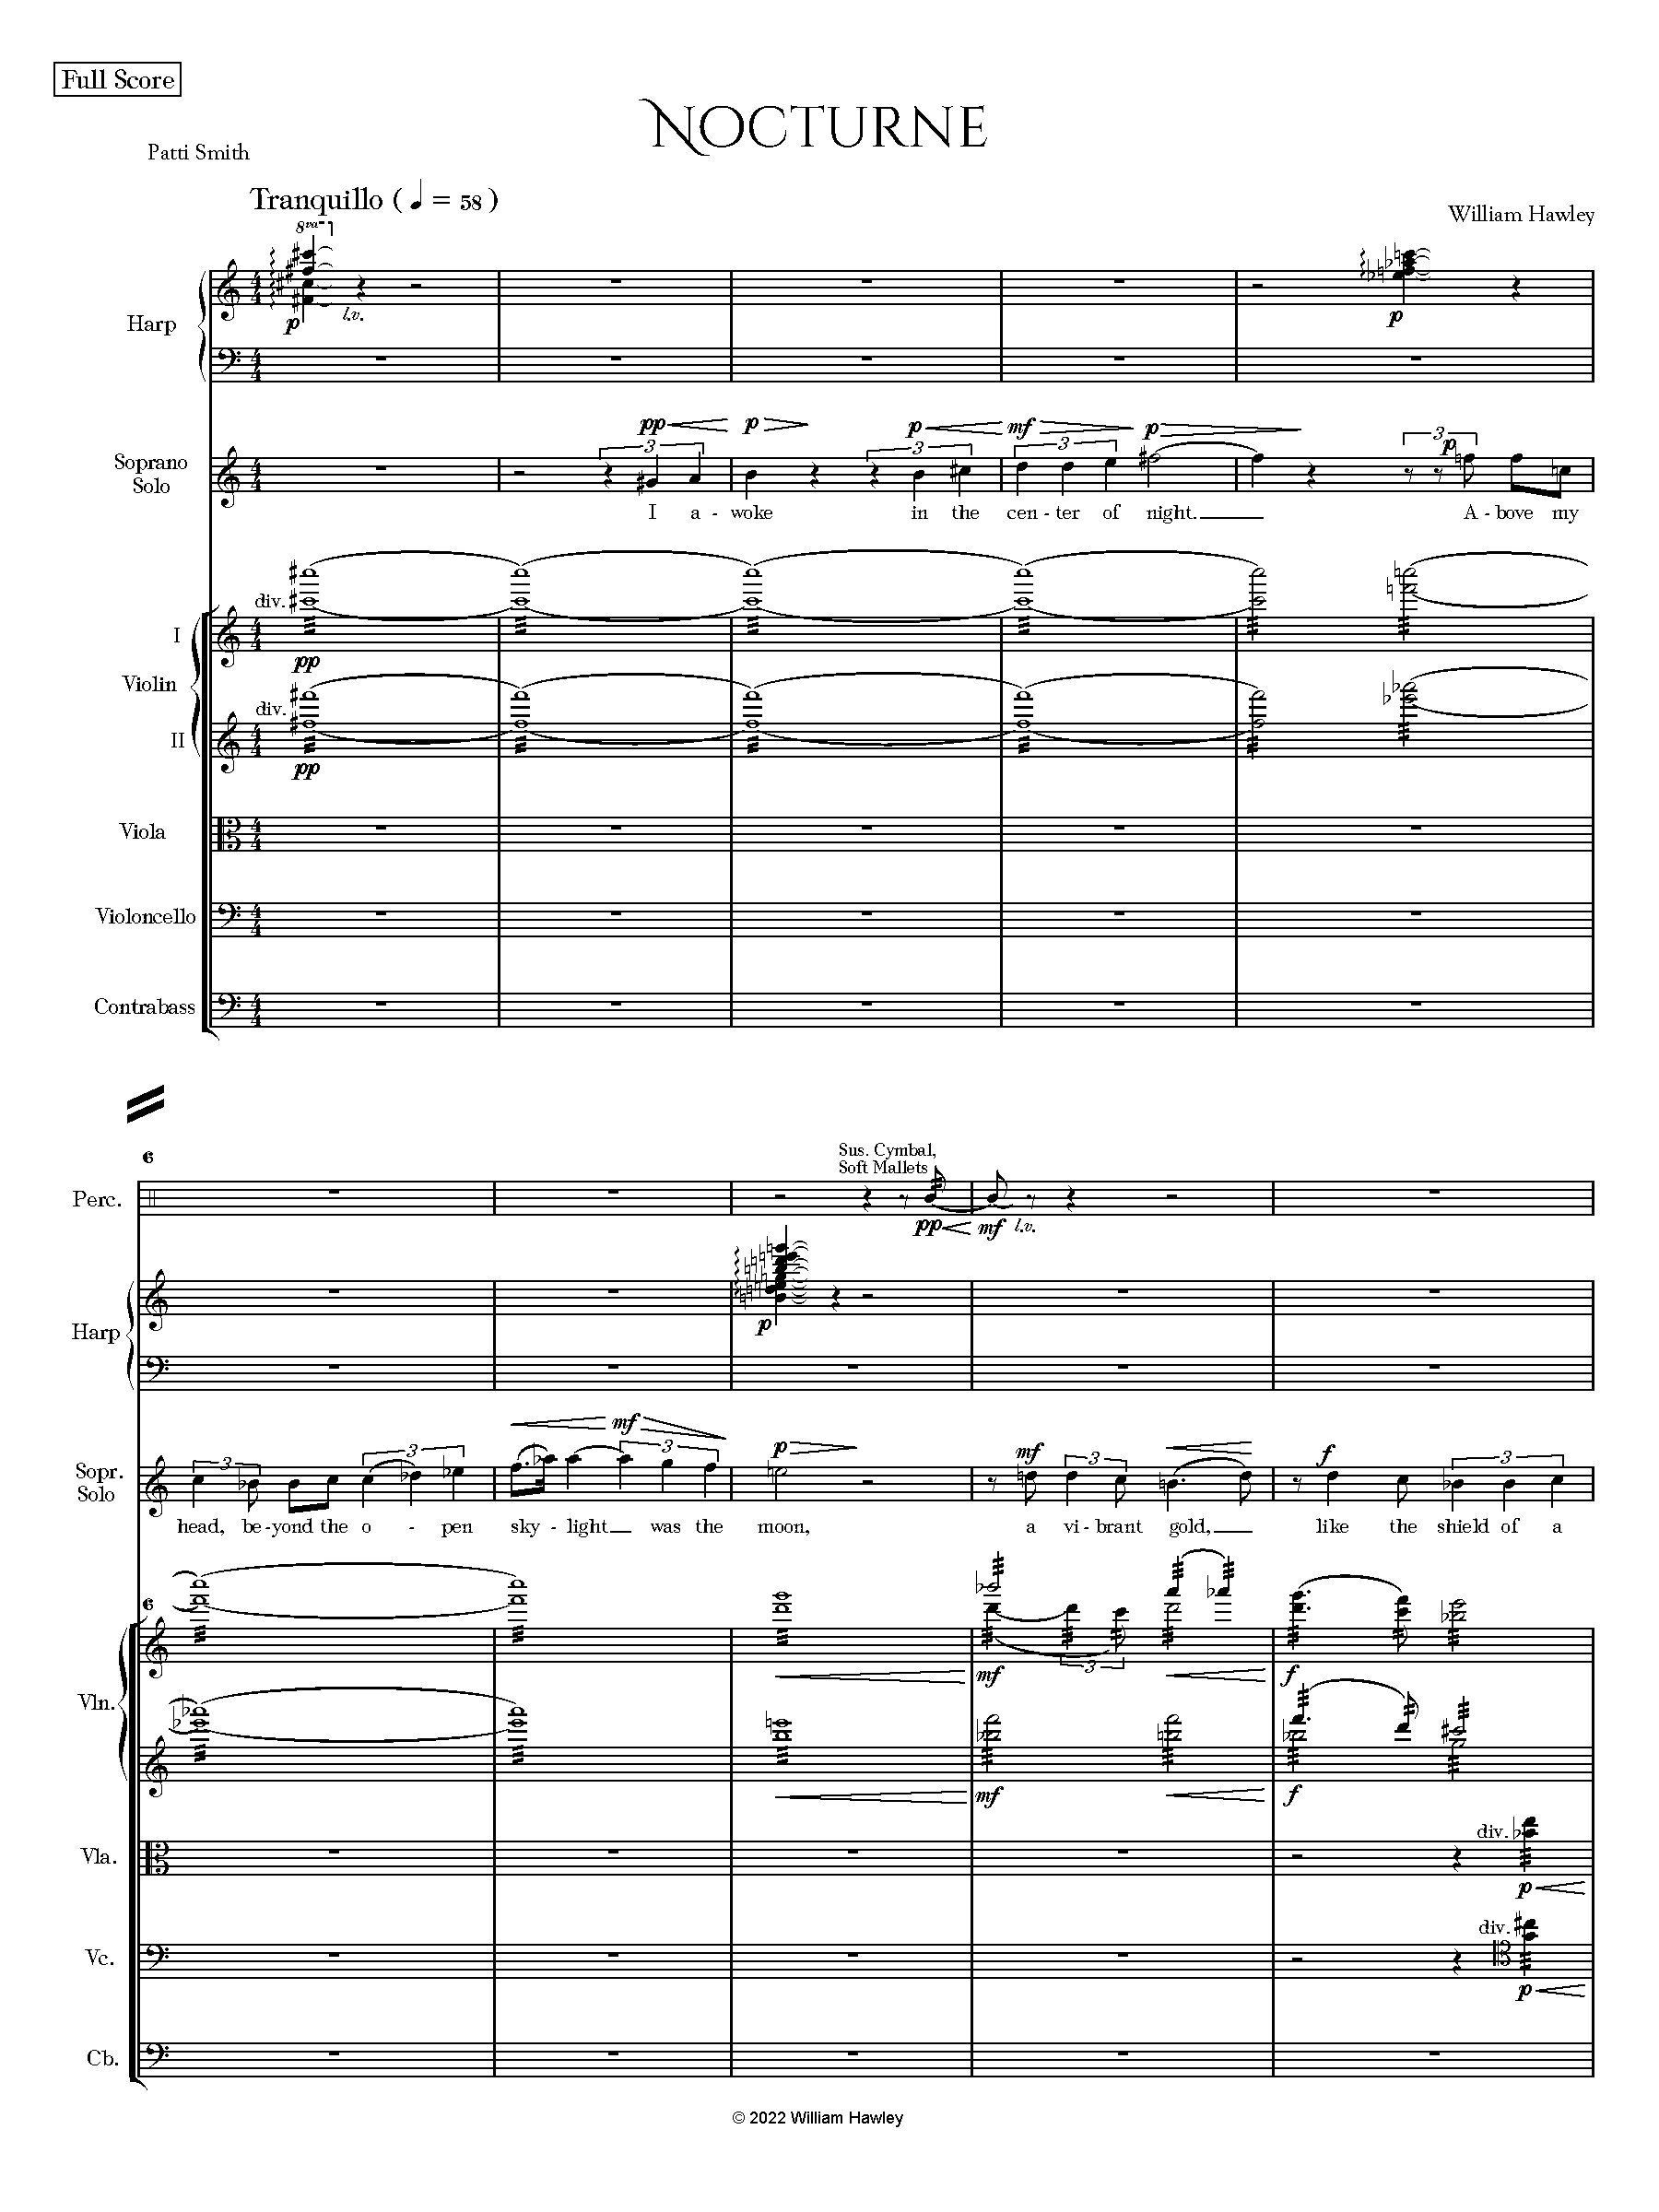 Nocturne, First Page